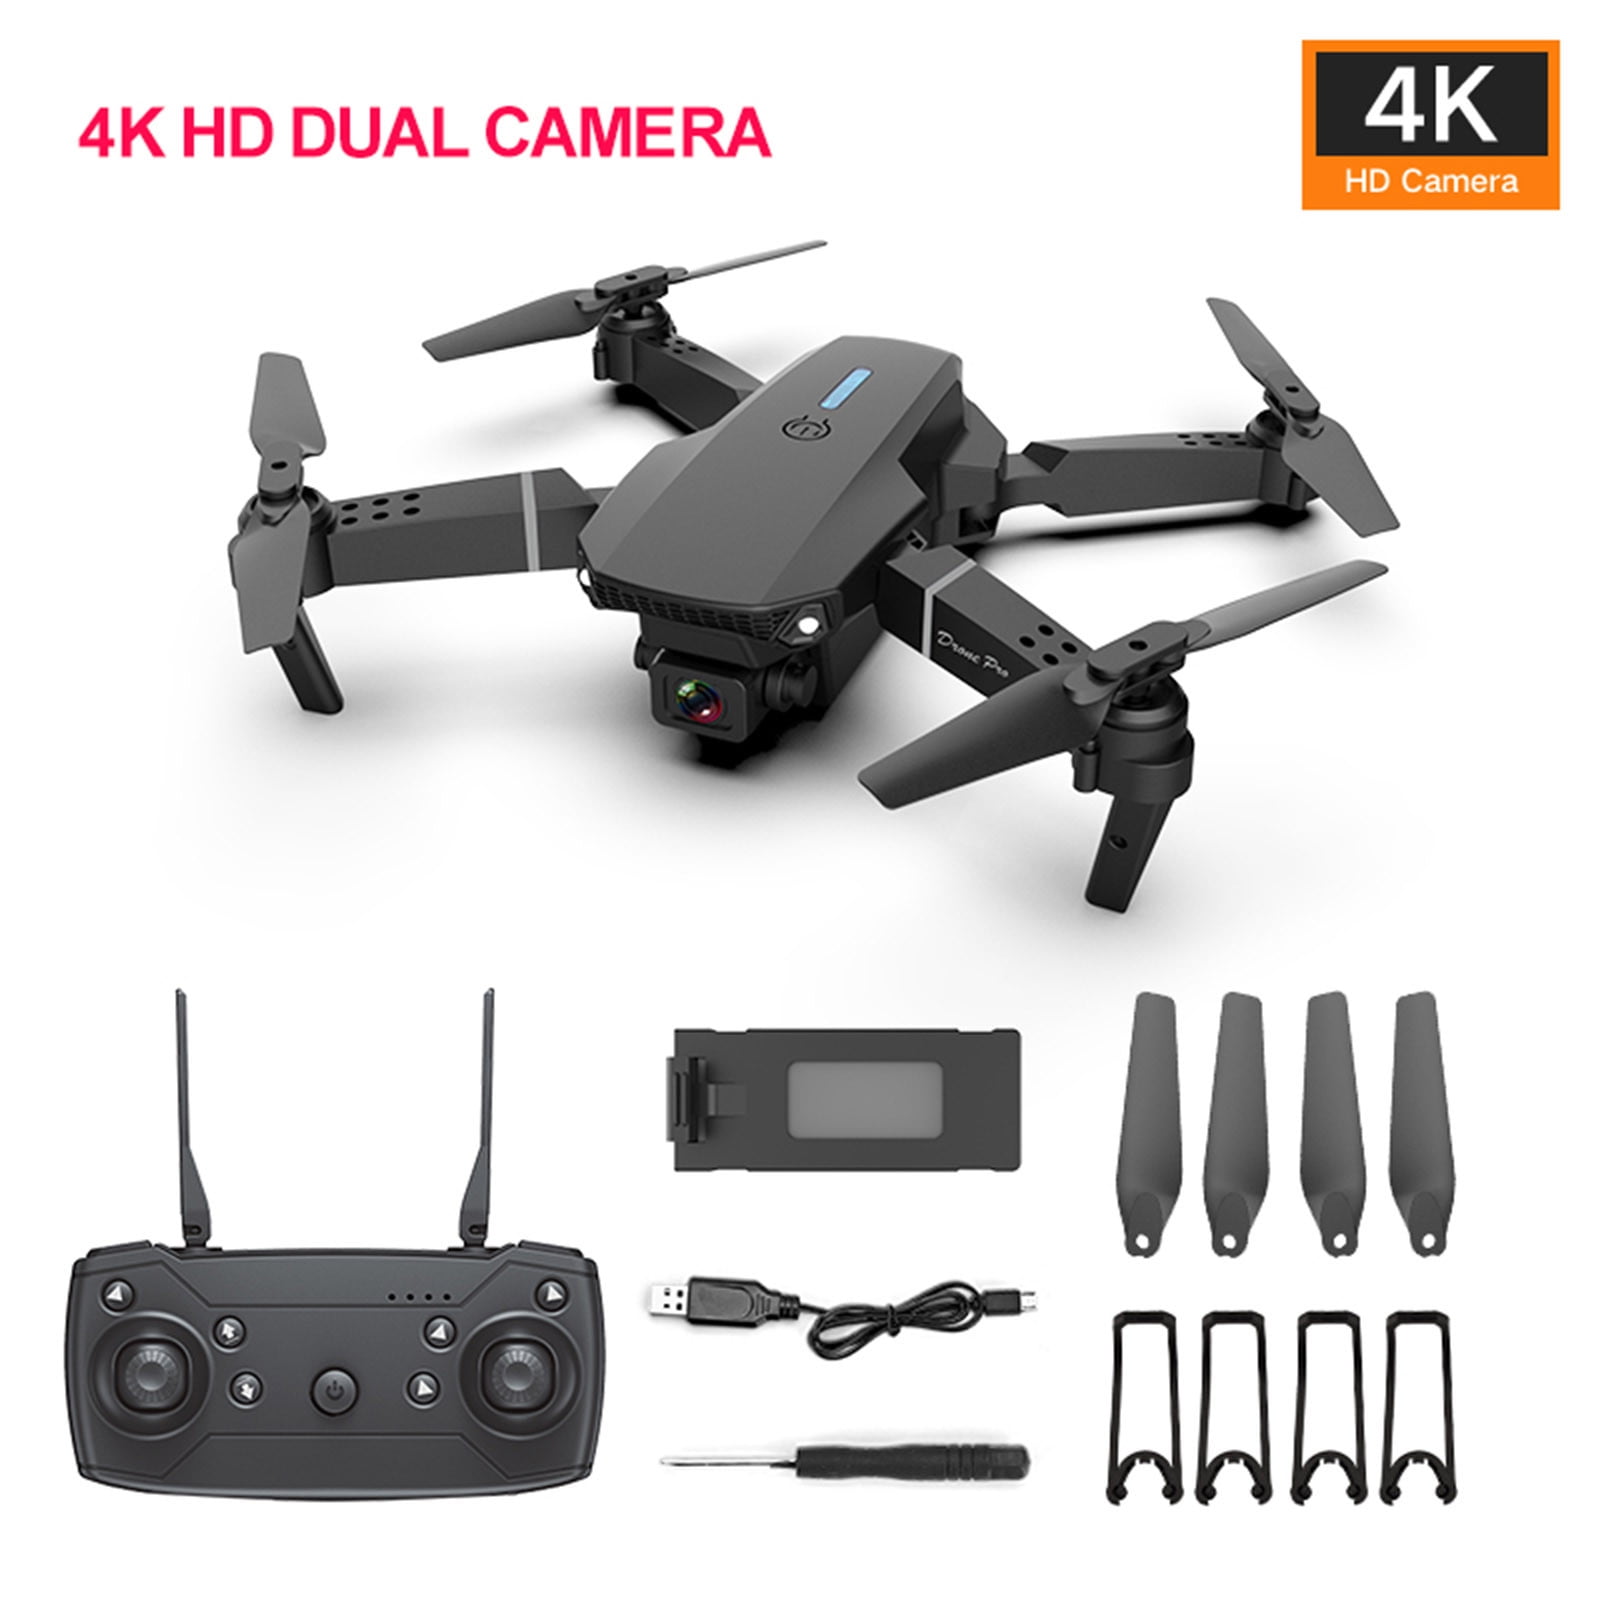 D99 GPS Drone with 8K UHD Camera, Foldable Drones for Adults Beginners, RC  Quadcopter Drone, Brushless Motor, VR Mode, GPS Auto Follow